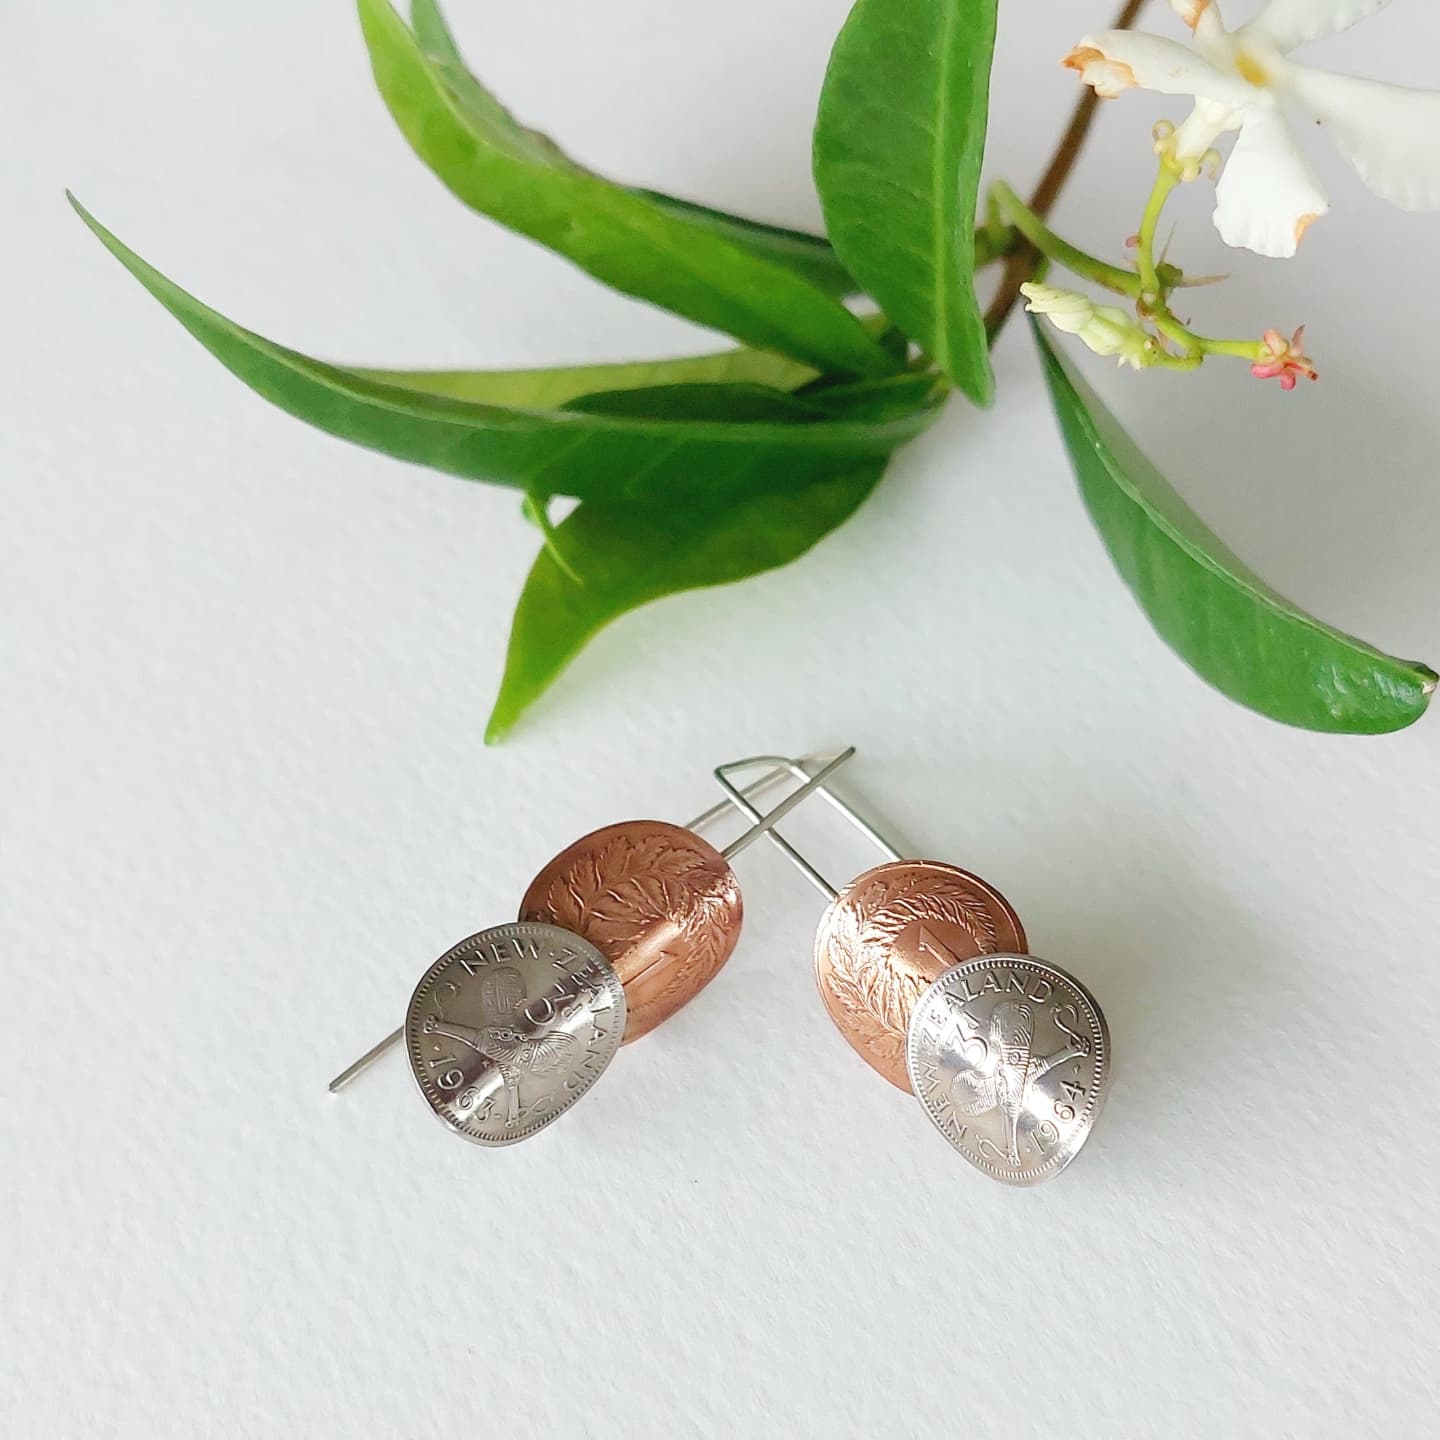 Re-minted Duo Artisan Coin Earrings - Silver, Copper or Mixed Metals